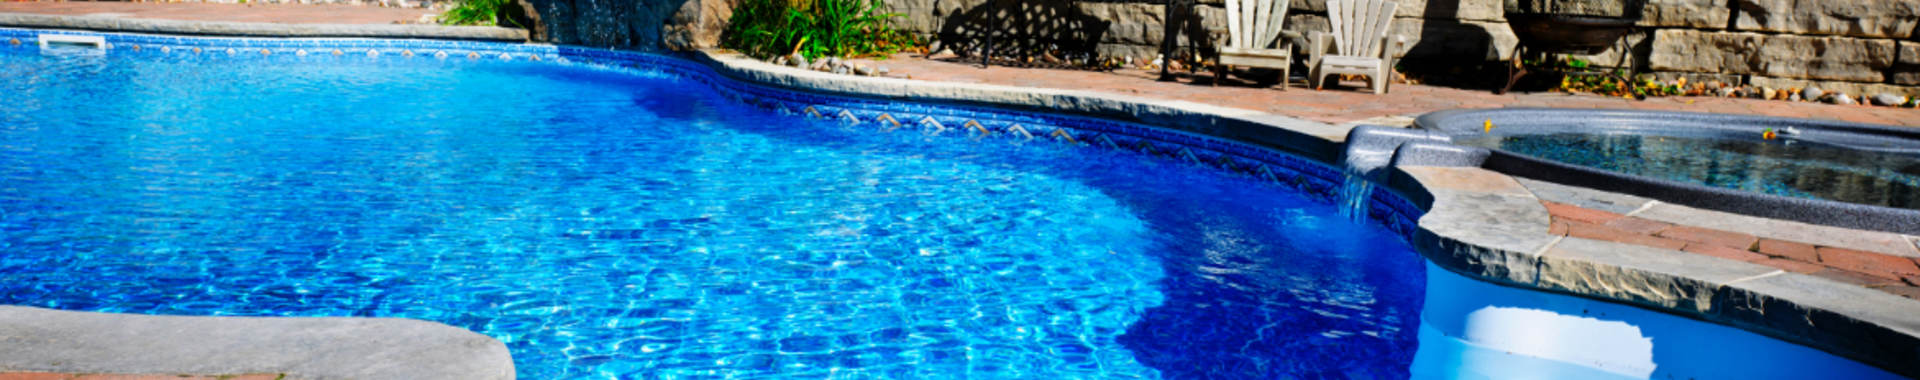 Image of a household pool